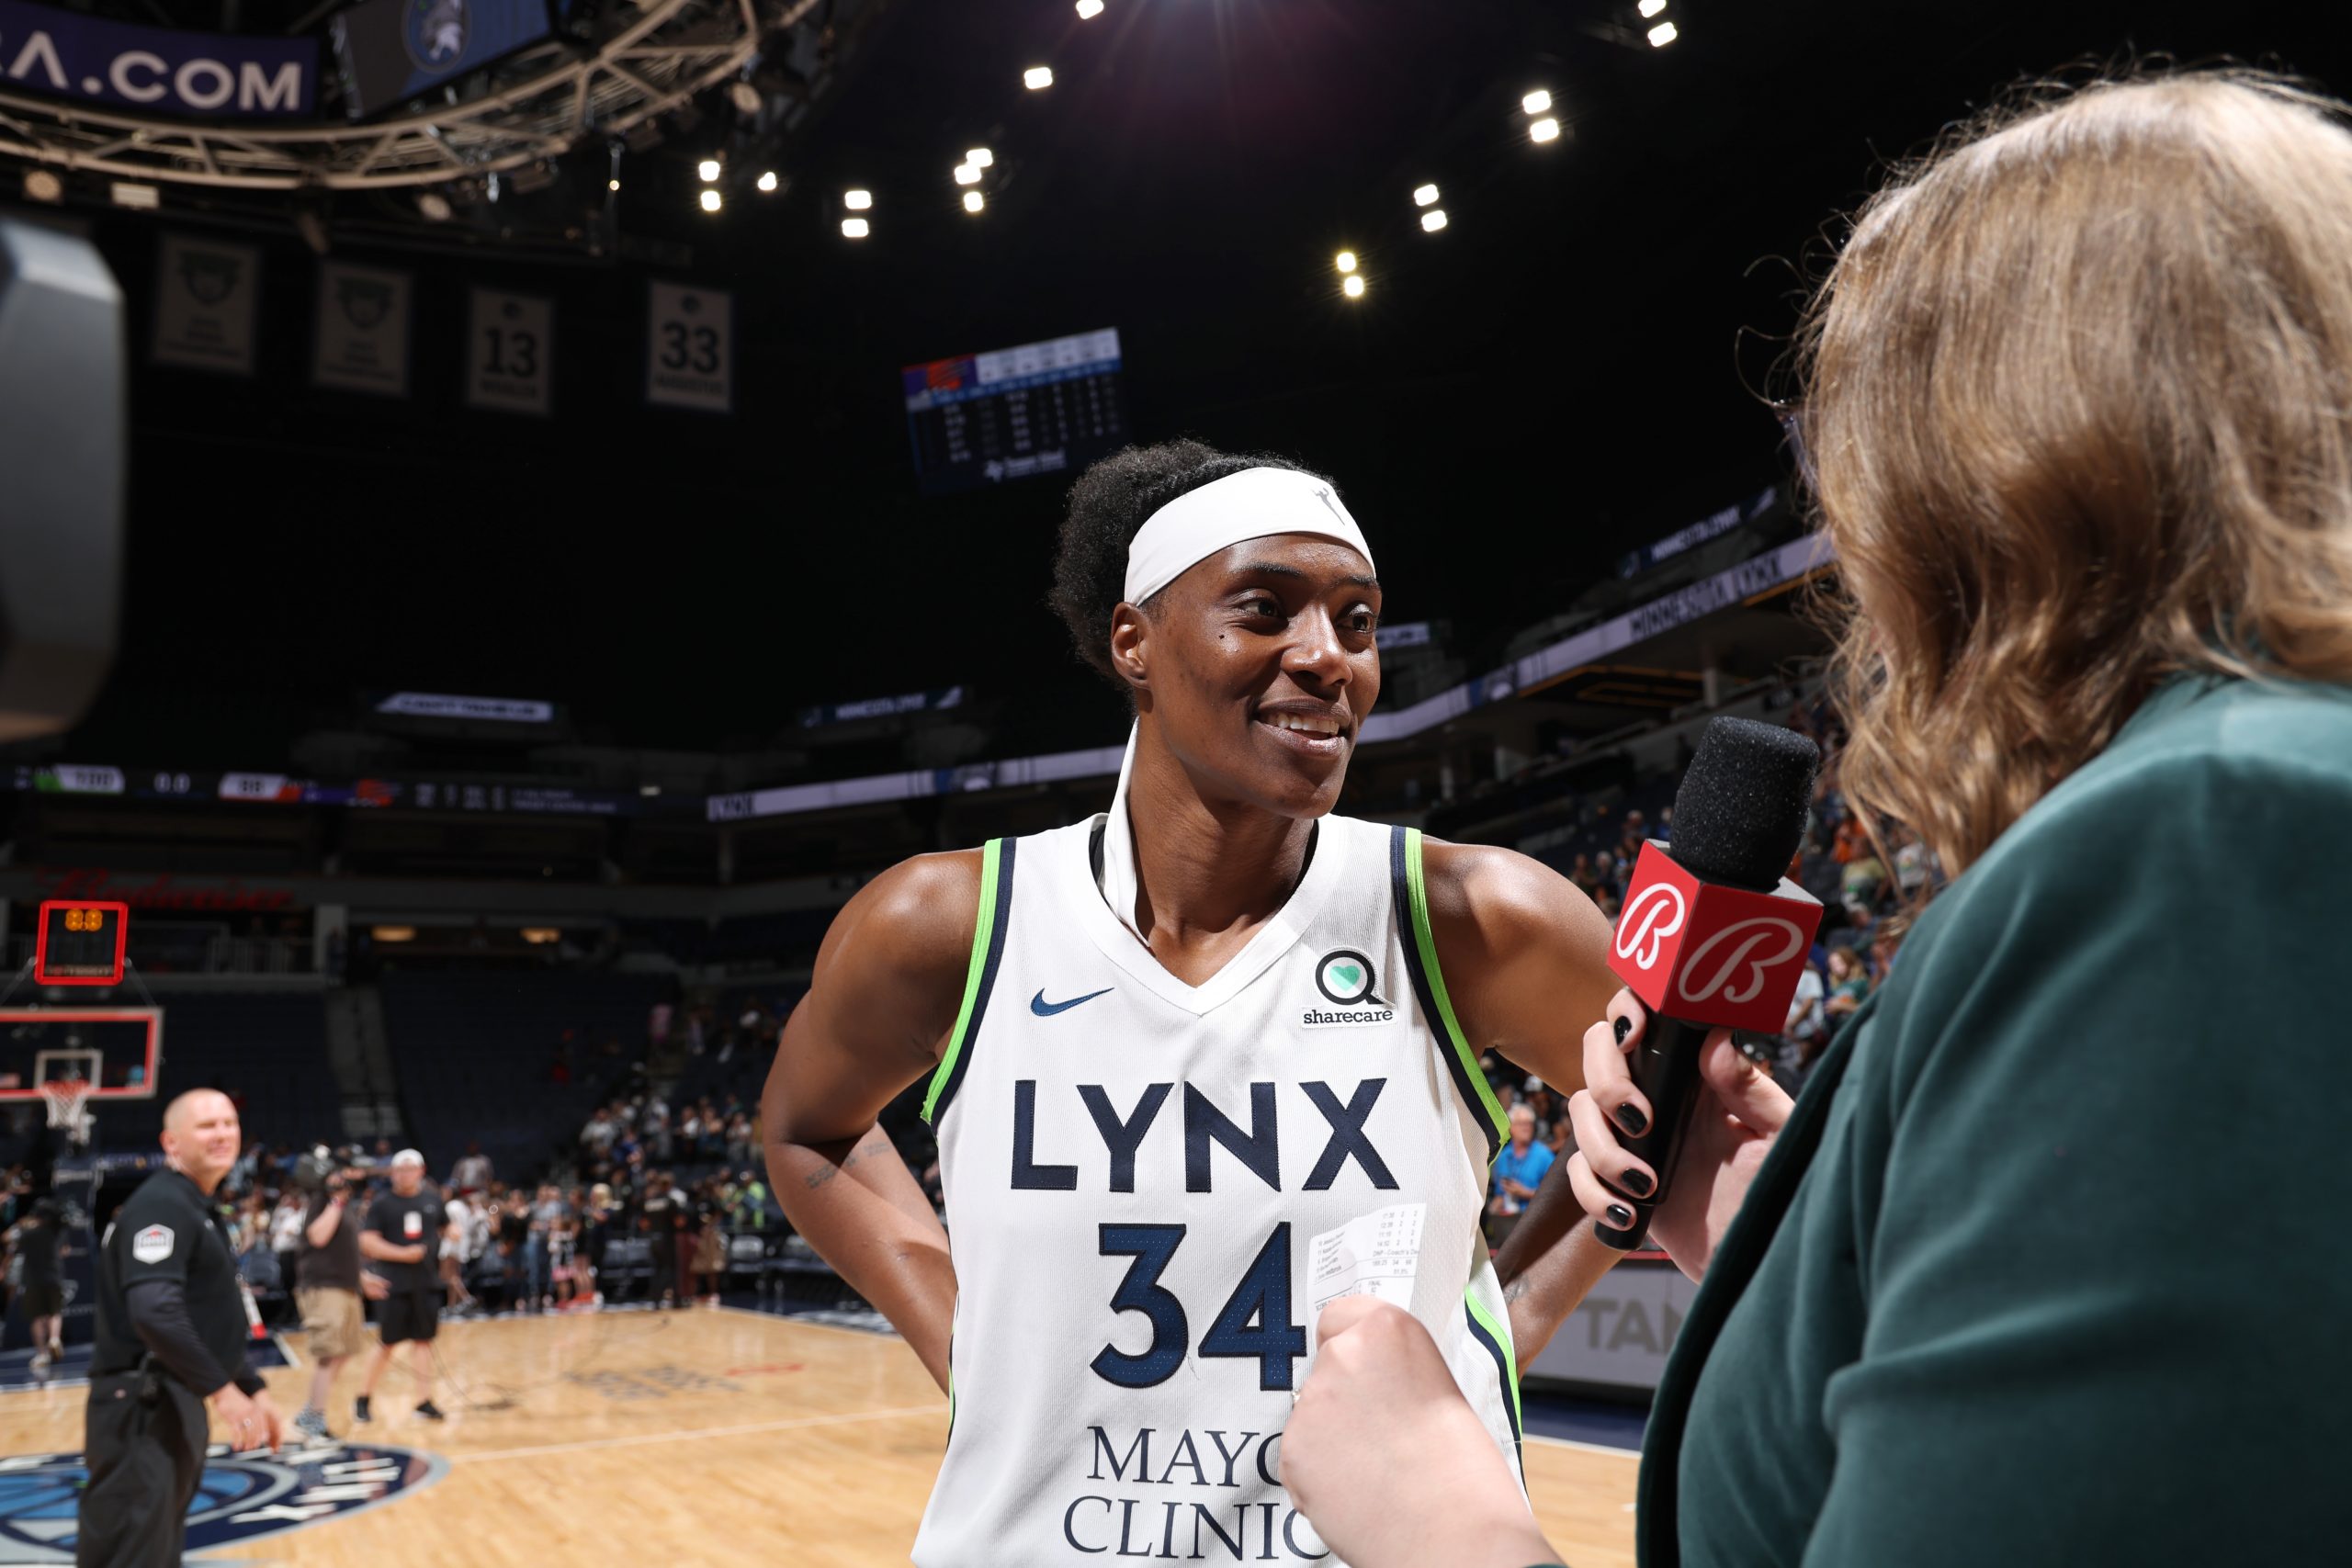 Miami's Sylvia Fowles becomes WNBA's leader in career rebounds